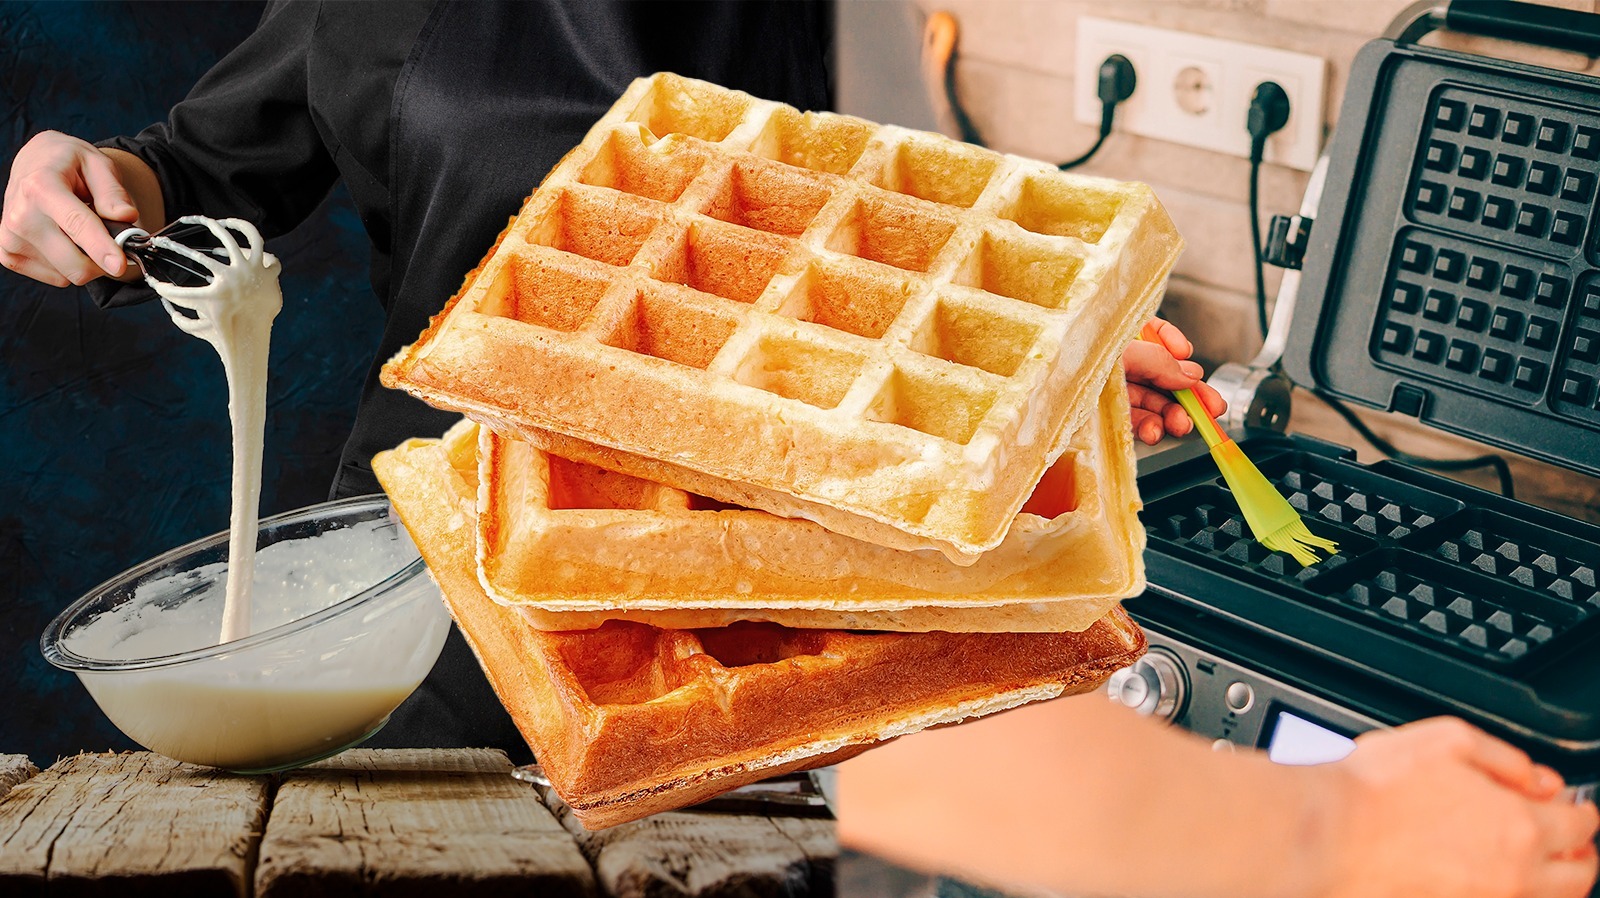 https://www.thedailymeal.com/img/gallery/19-common-mistakes-to-avoid-when-making-waffles/l-intro-1684178395.jpg